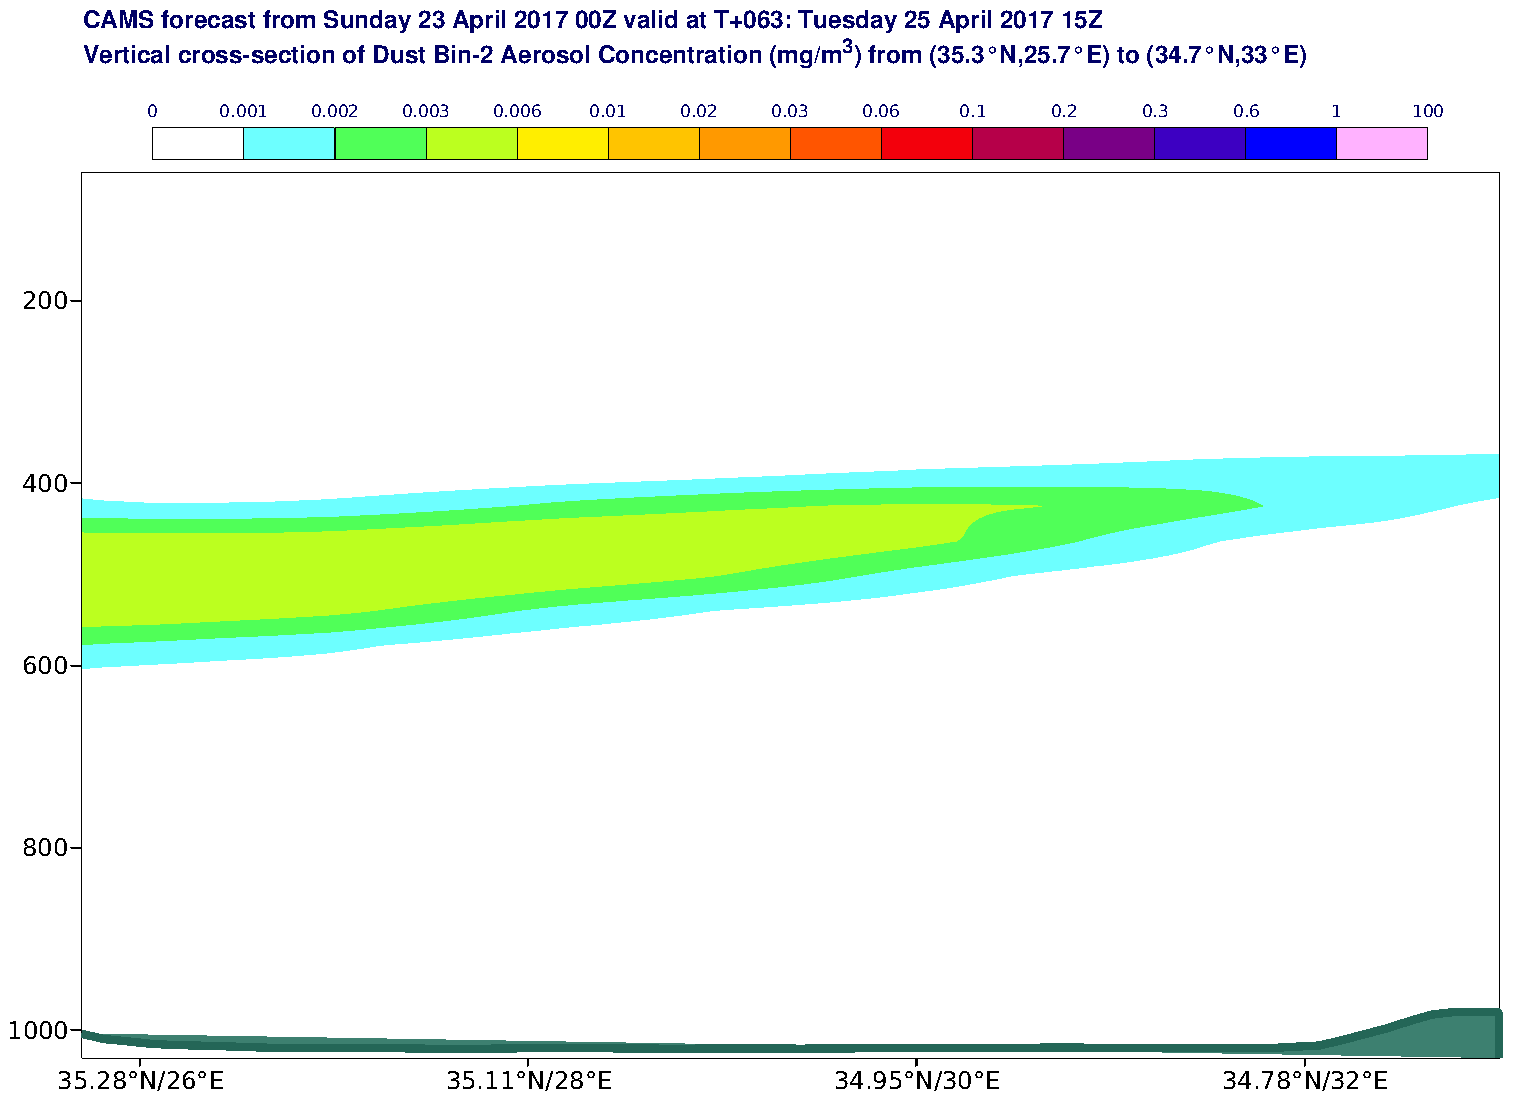 Vertical cross-section of Dust Bin-2 Aerosol Concentration (mg/m3) valid at T63 - 2017-04-25 15:00